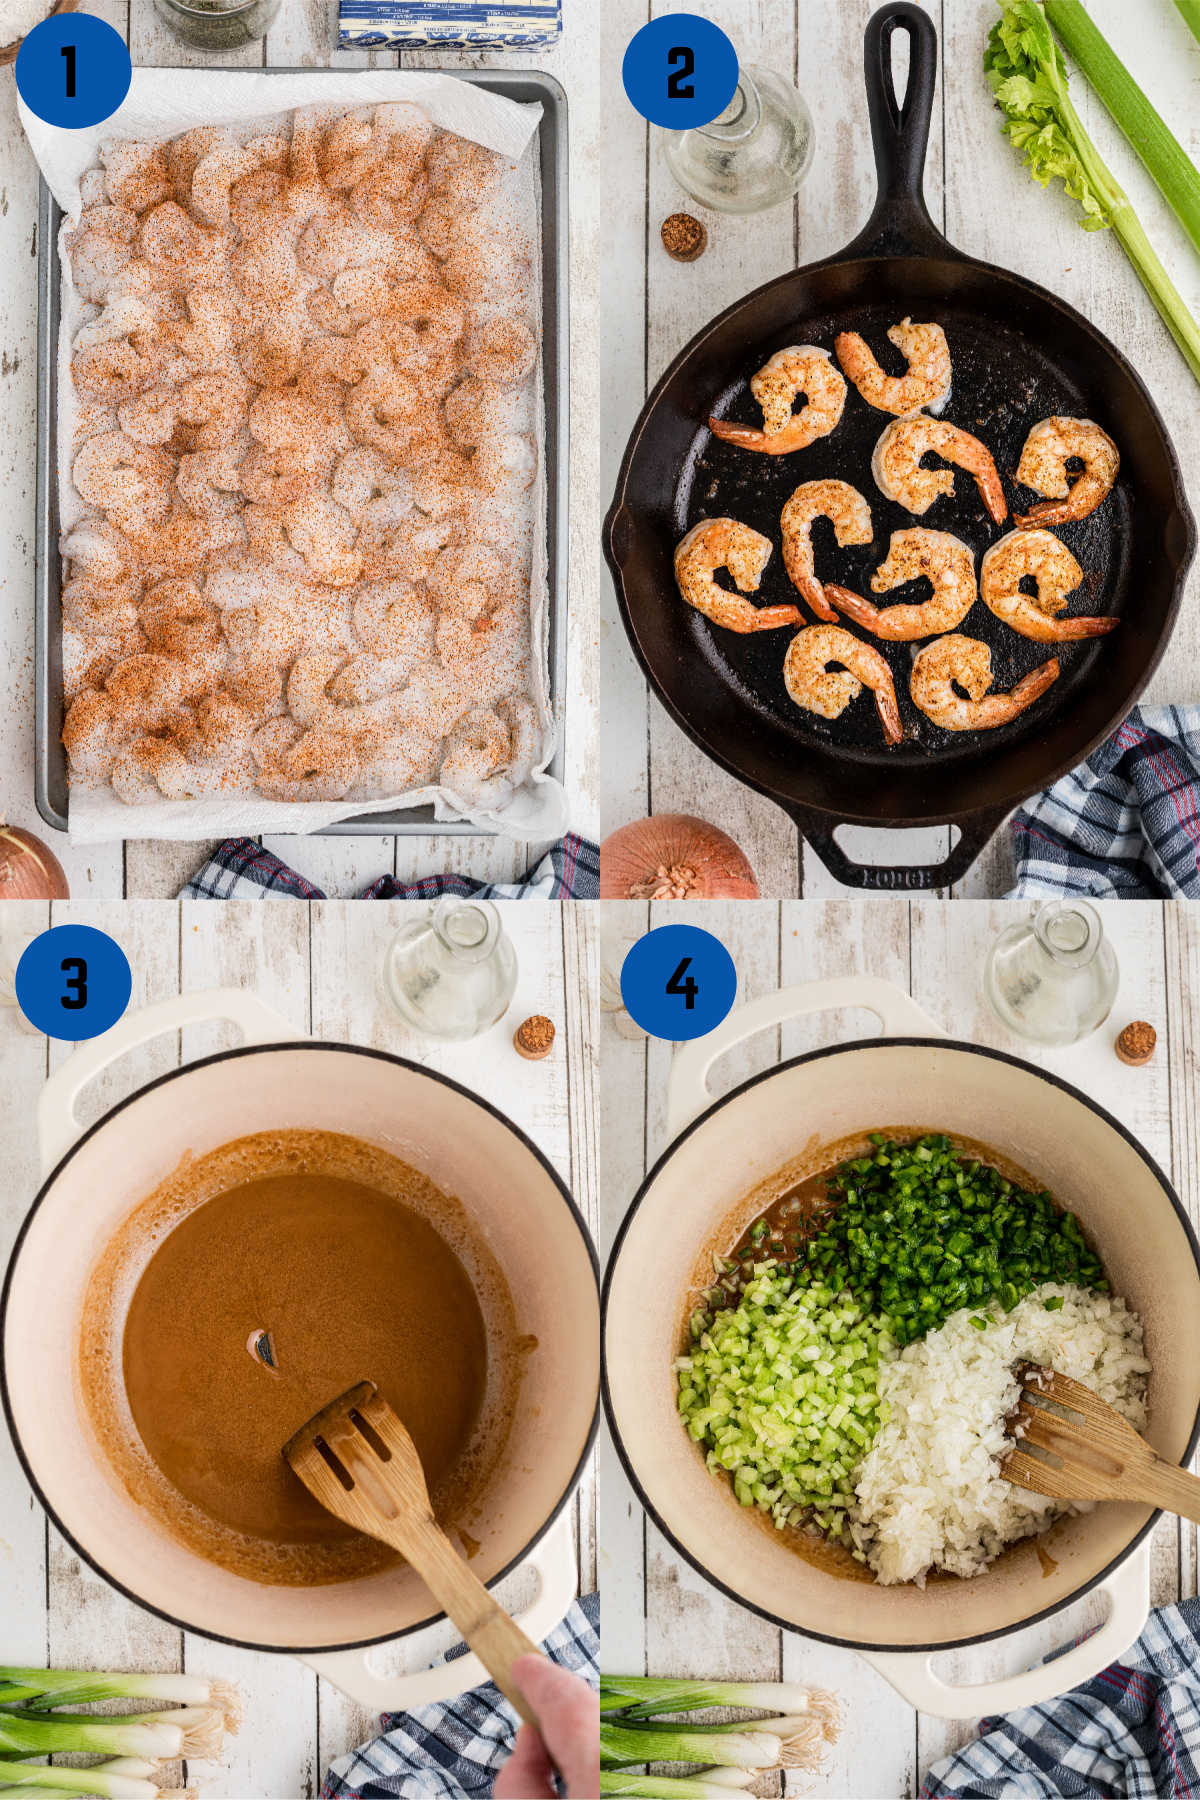 A collage of four images showing how to make shrimp etouffee, steps 1 to 4.